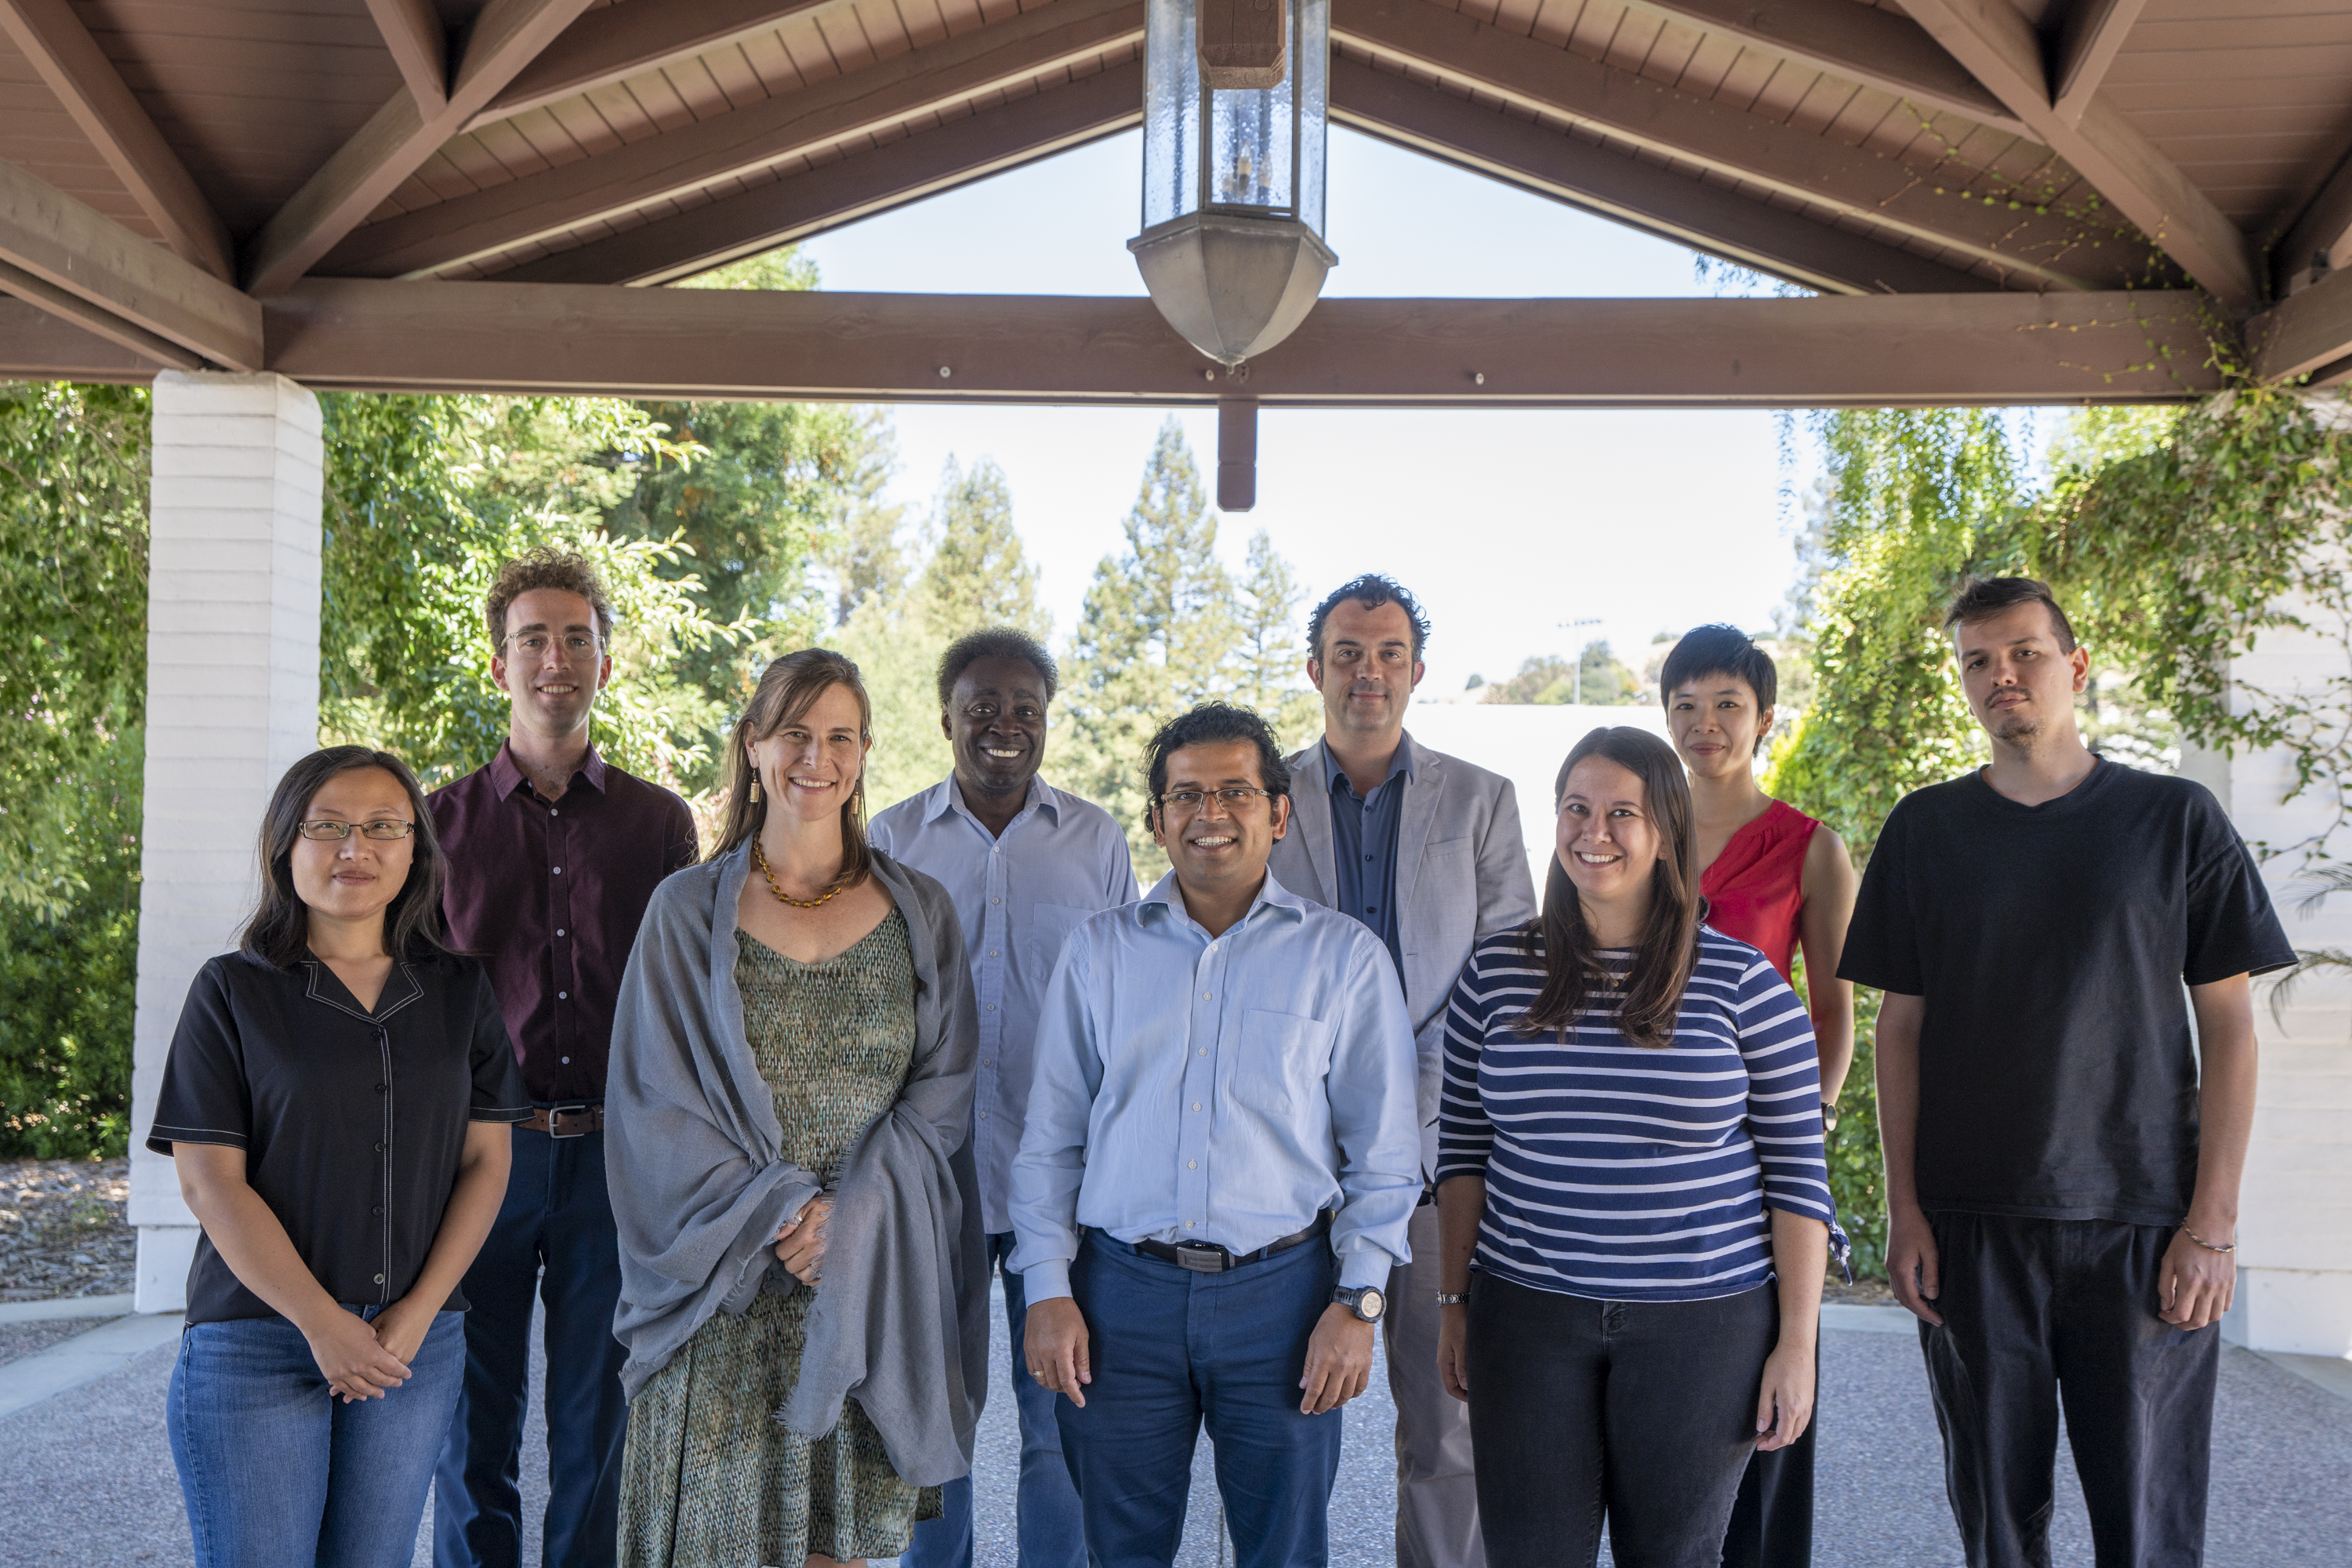 New faculty and fellows who participated in the New Faculty Orientation, (from left to right) Yunting Pu, Michael Blackburn, Kristen Sbrogna, Carlton Oler, Manvendra Tiwari, Chris Arnold, Victoria Noquez, Amy Chu, and Angelantonio Grossi.